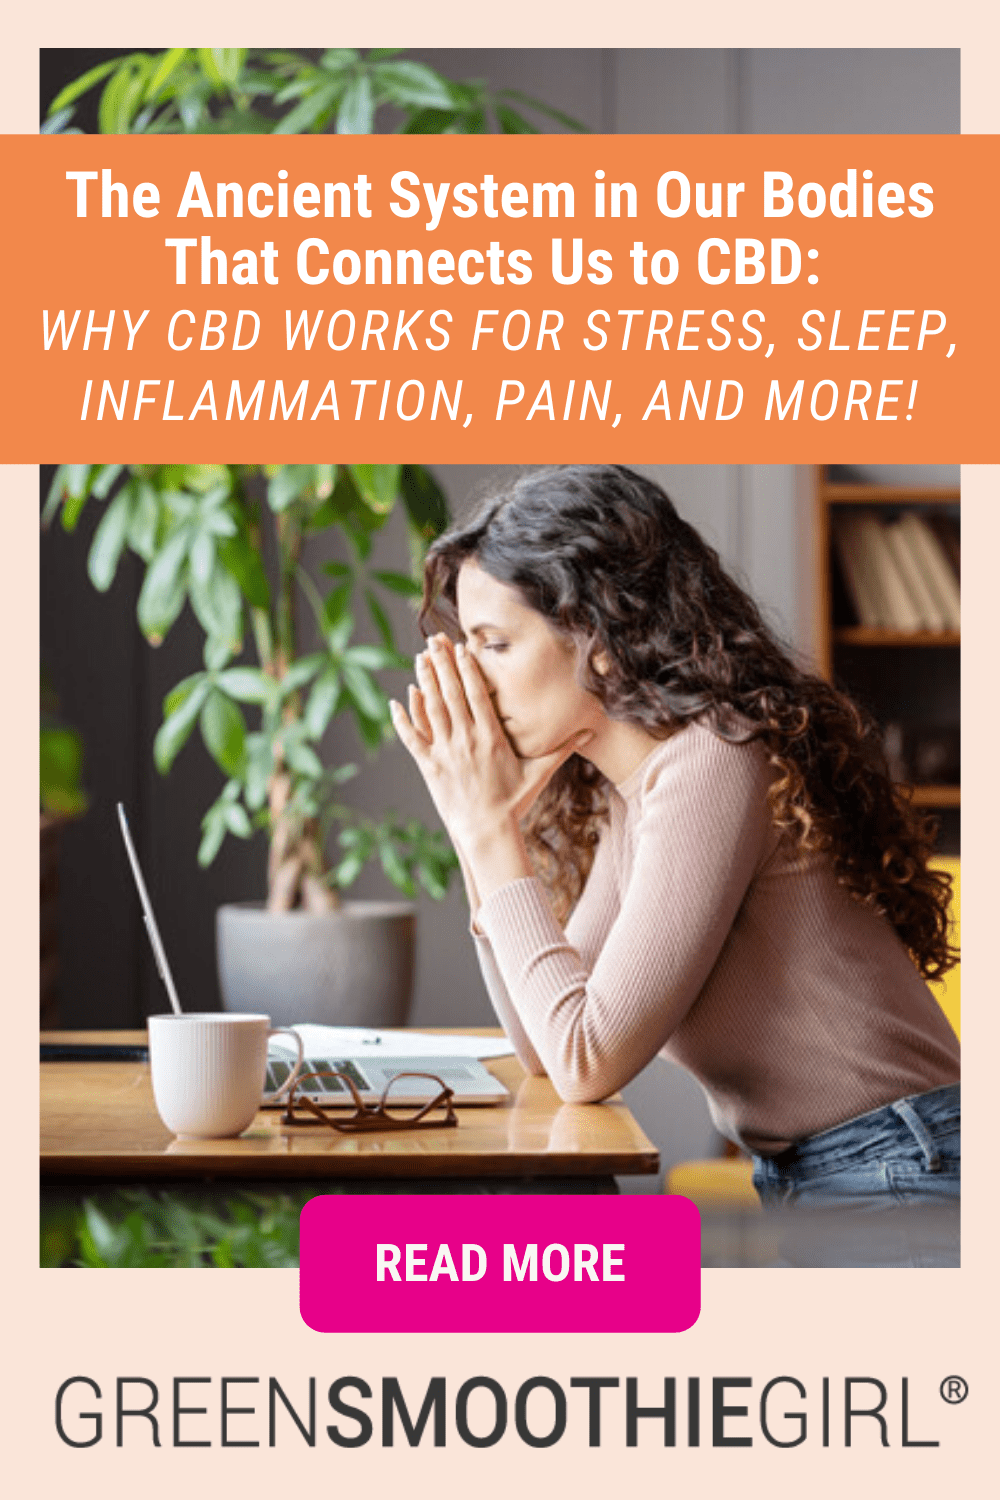 The-Ancient-System-in-Our-Bodies-That-Connects-Us-to-CBD-Why-CBD-Works-for-Stress-Sleep-Inflammation-Pain-and-More